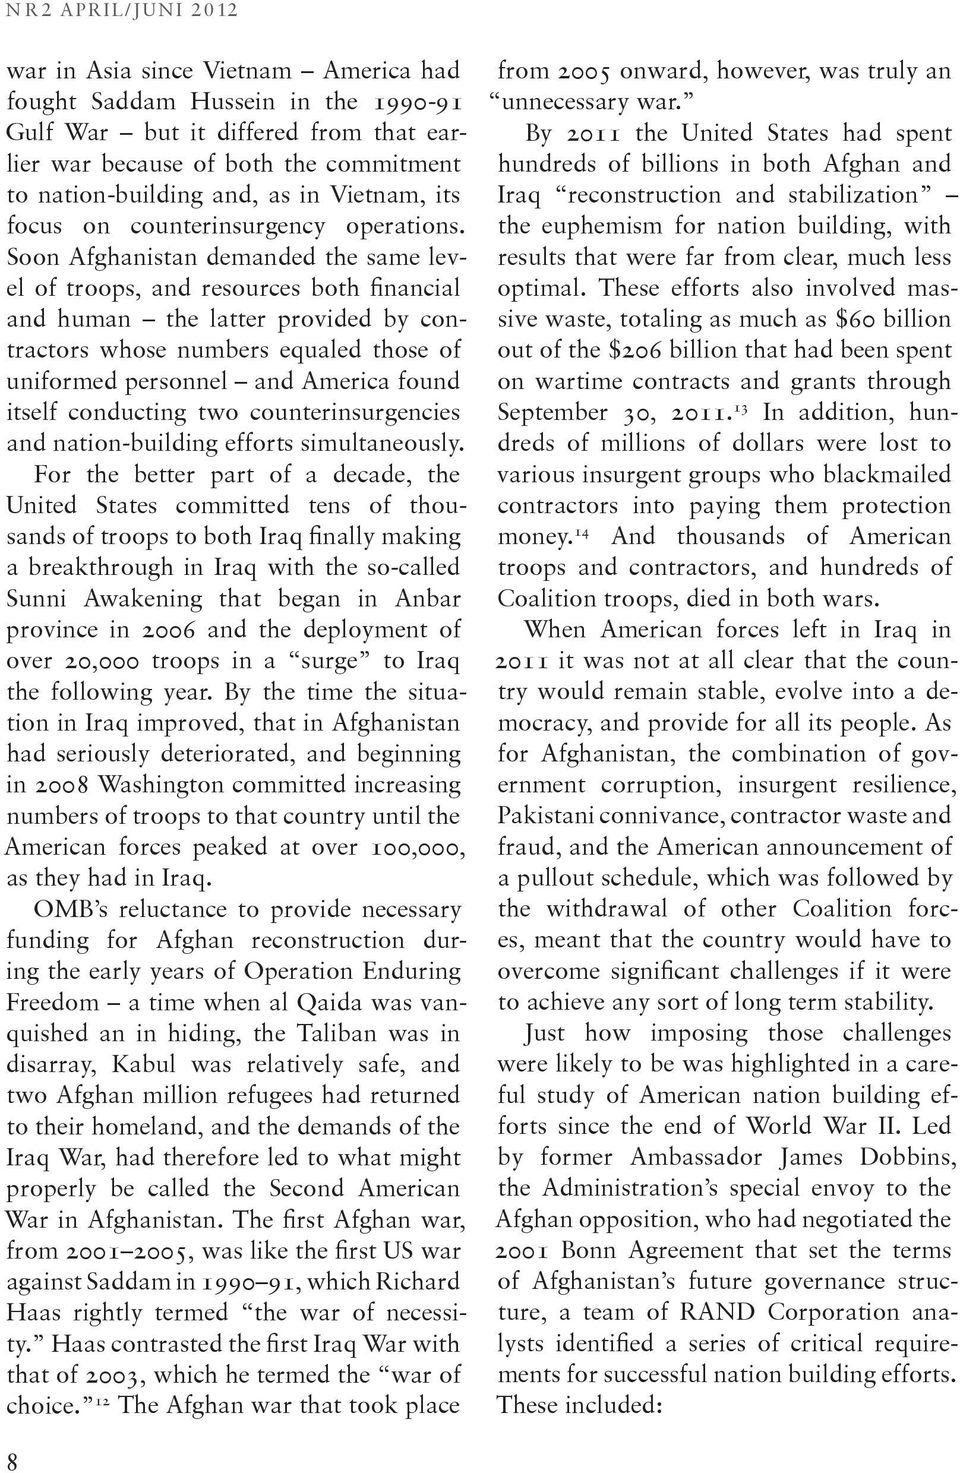 Soon Afghanistan demanded the same level of troops, and resources both financial and human the latter provided by contractors whose numbers equaled those of uniformed personnel and America found